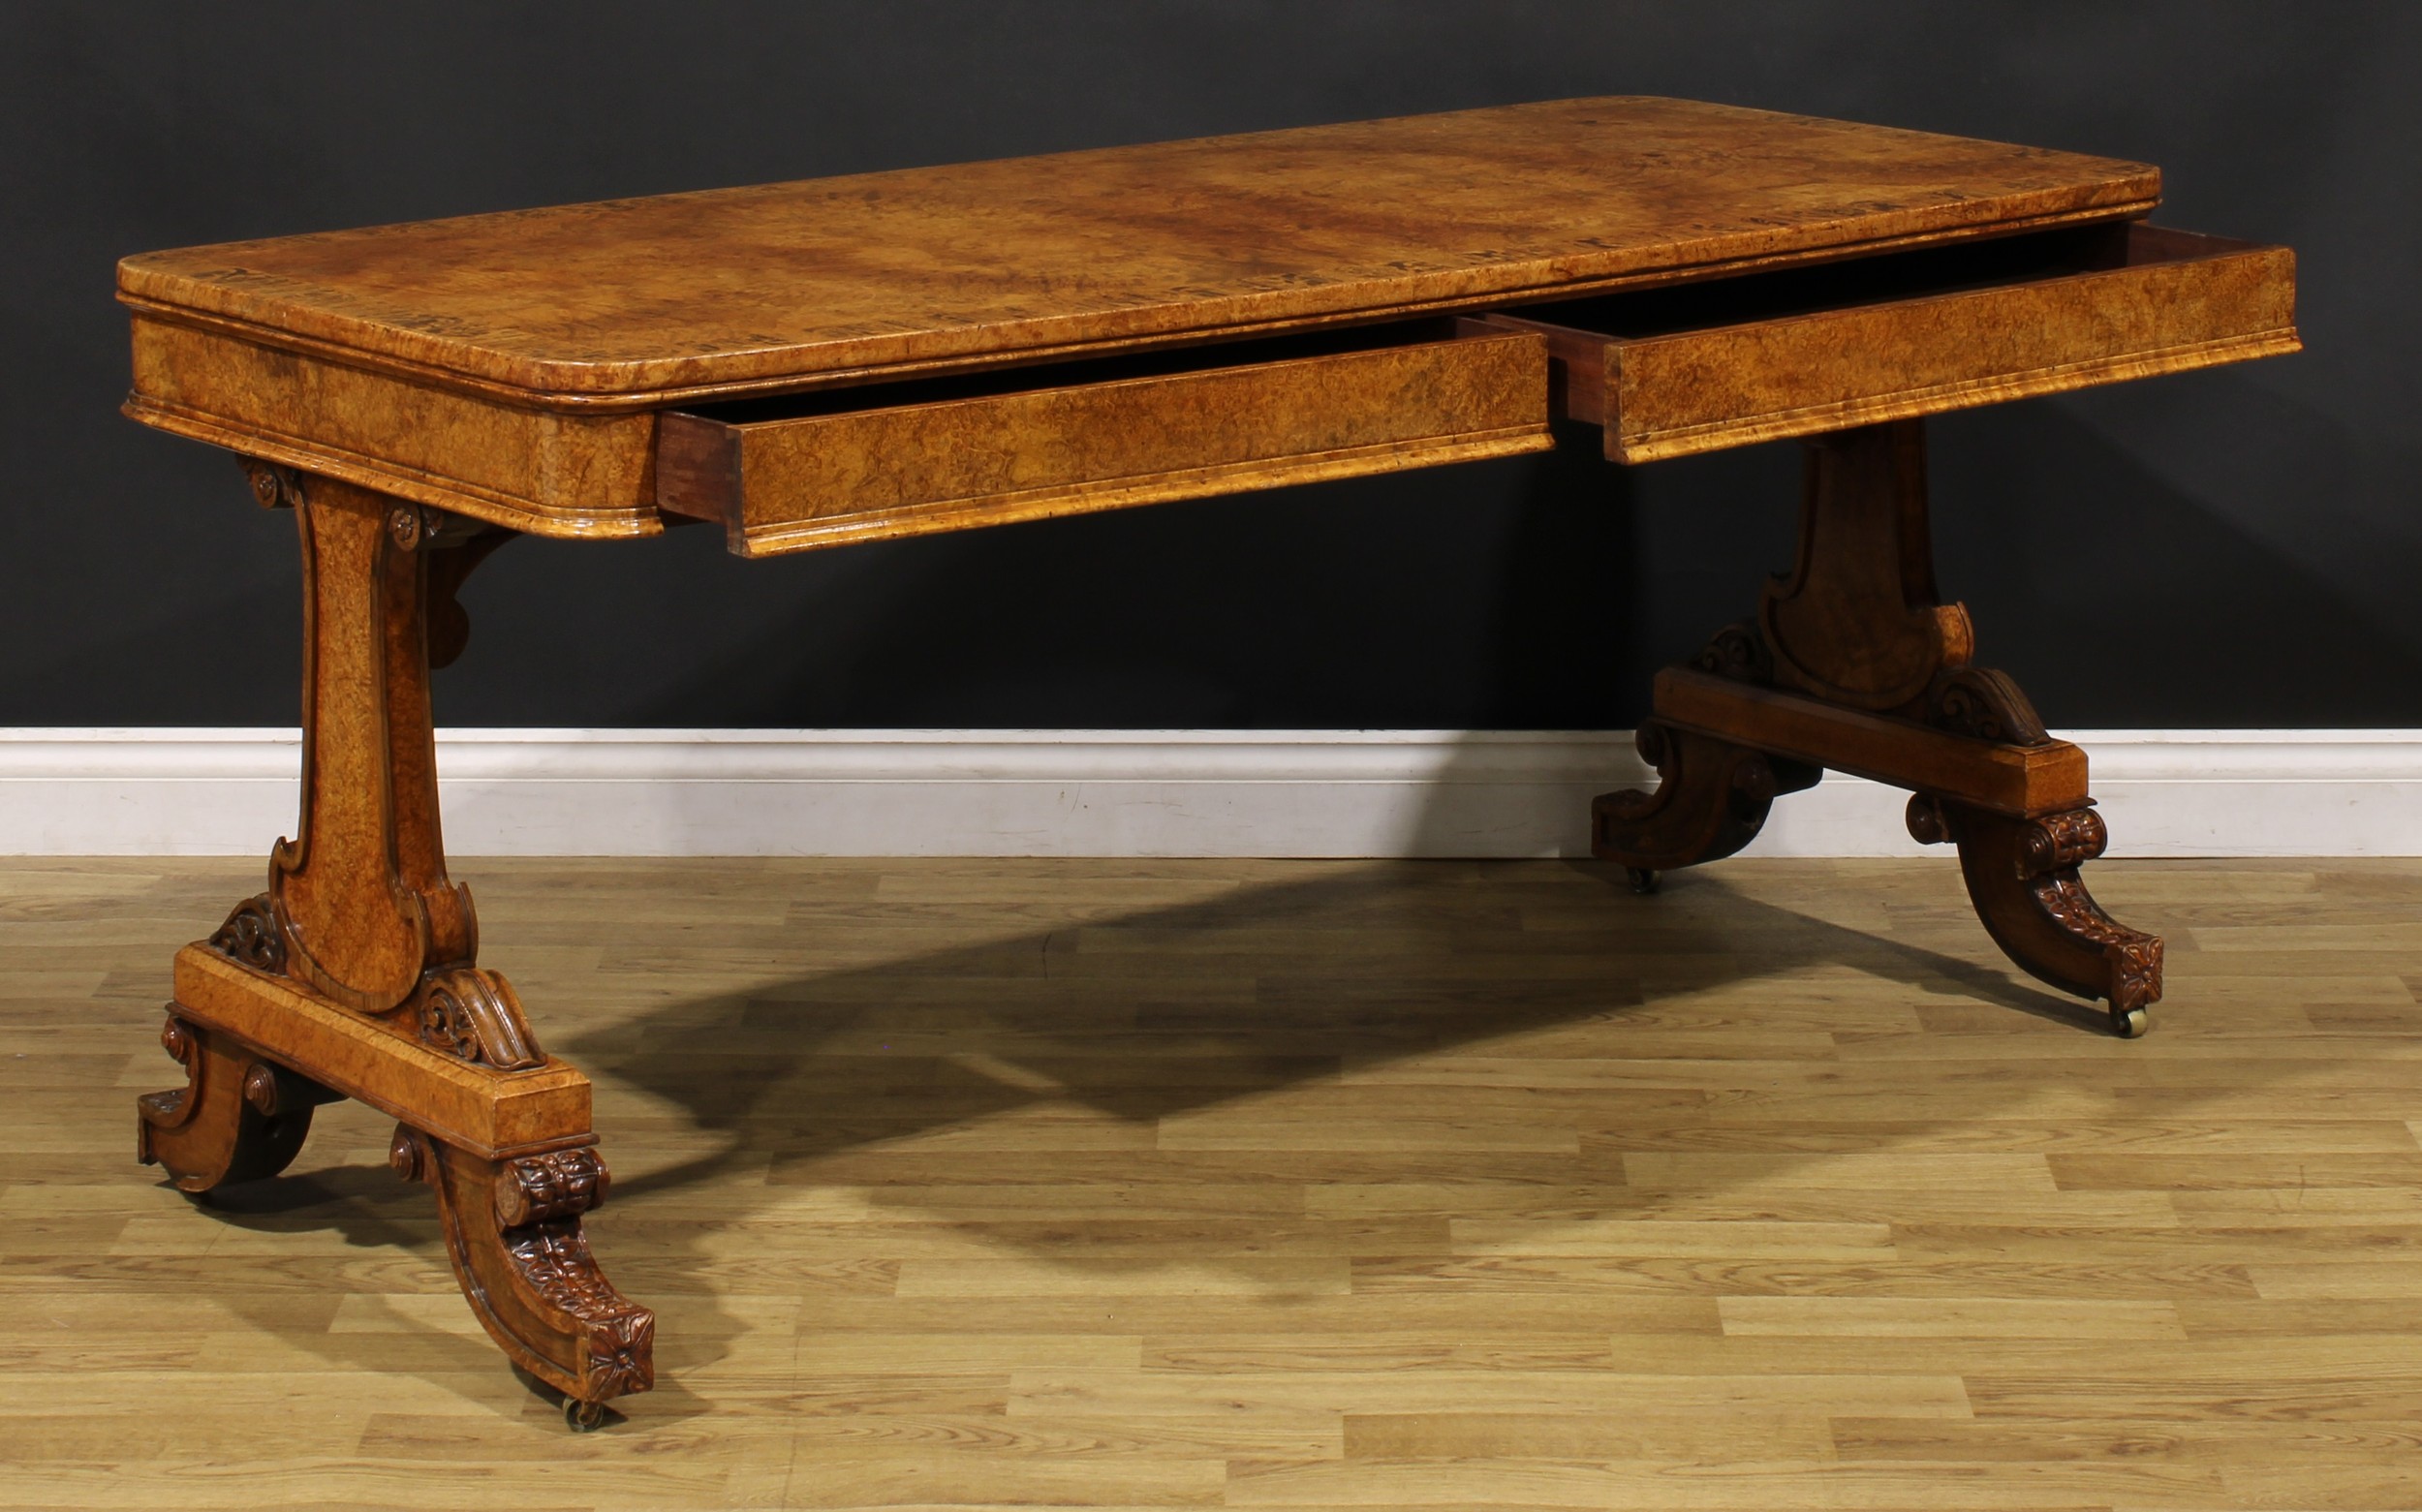 A William IV burr walnut and zebrawood marquetry library table, in the manner of George Bullock, - Image 4 of 6